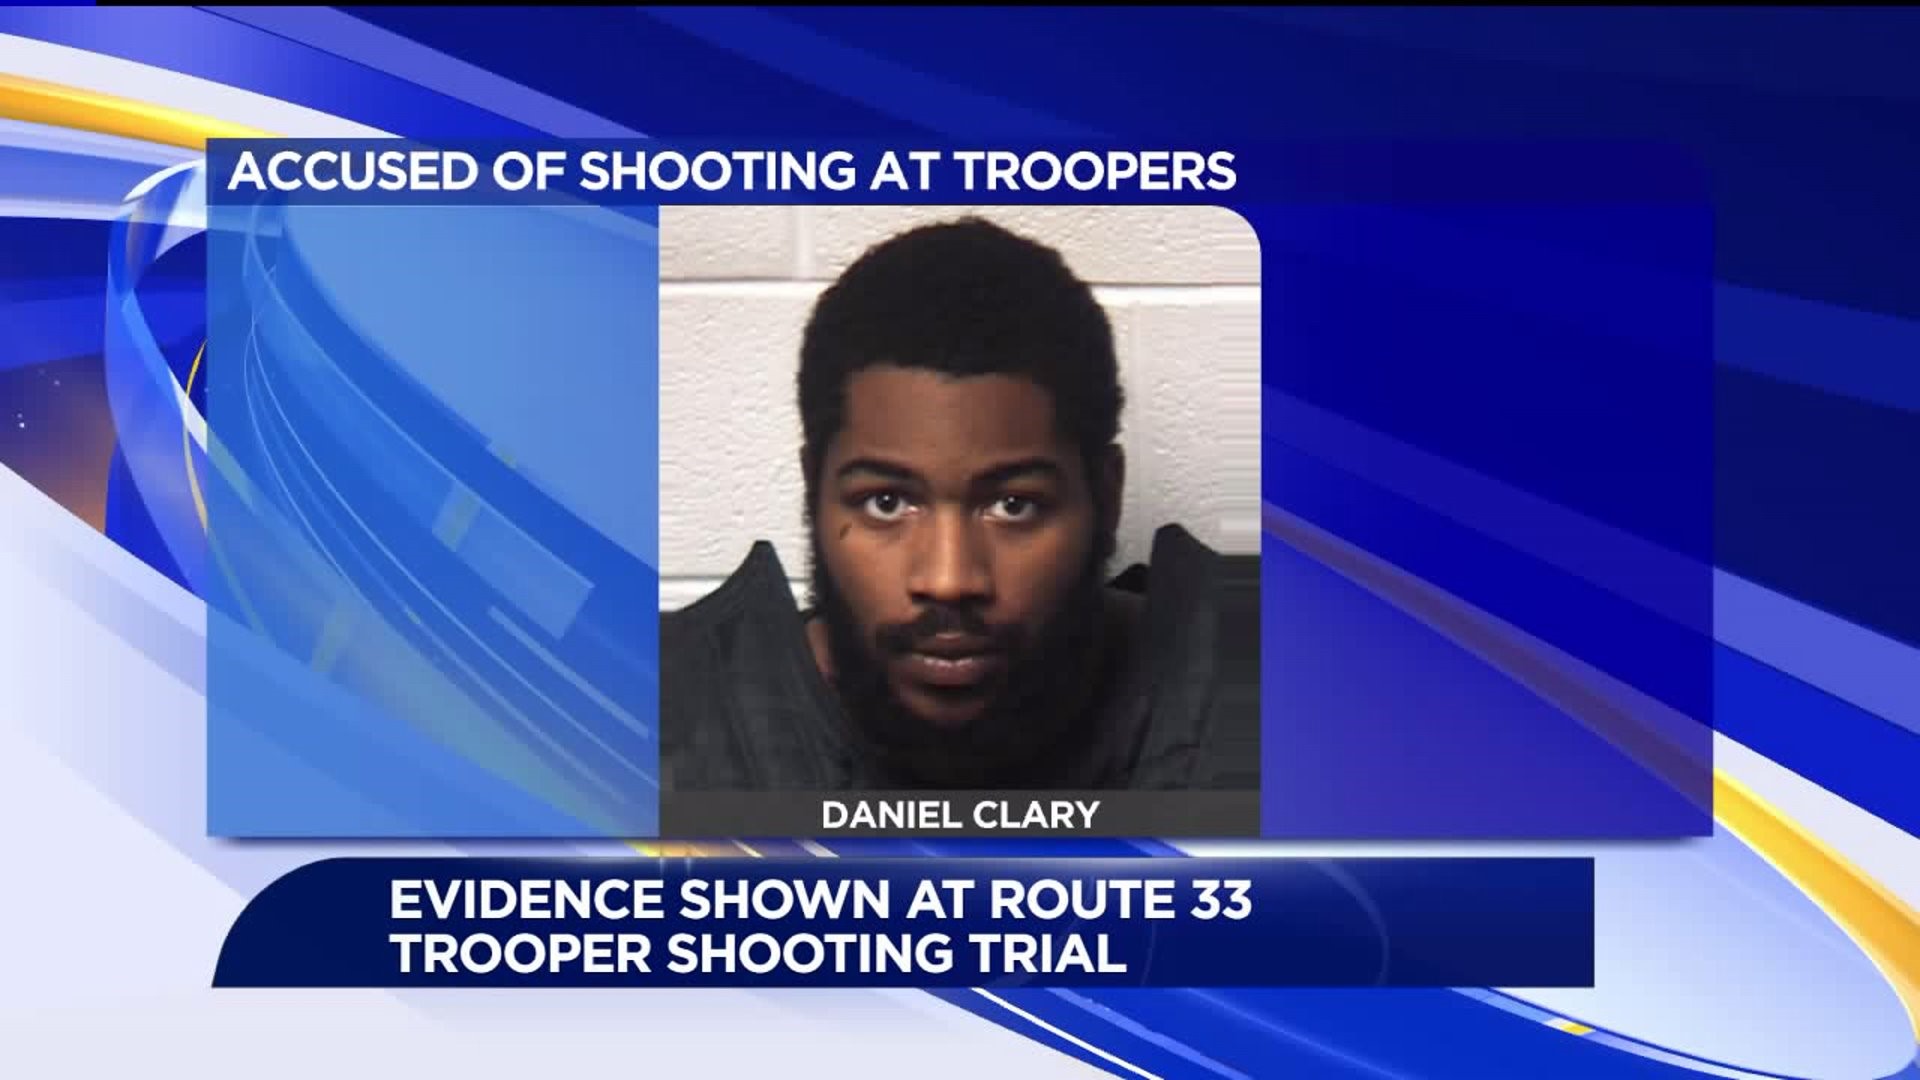 More Evidence Given in Trooper Shooting Trial